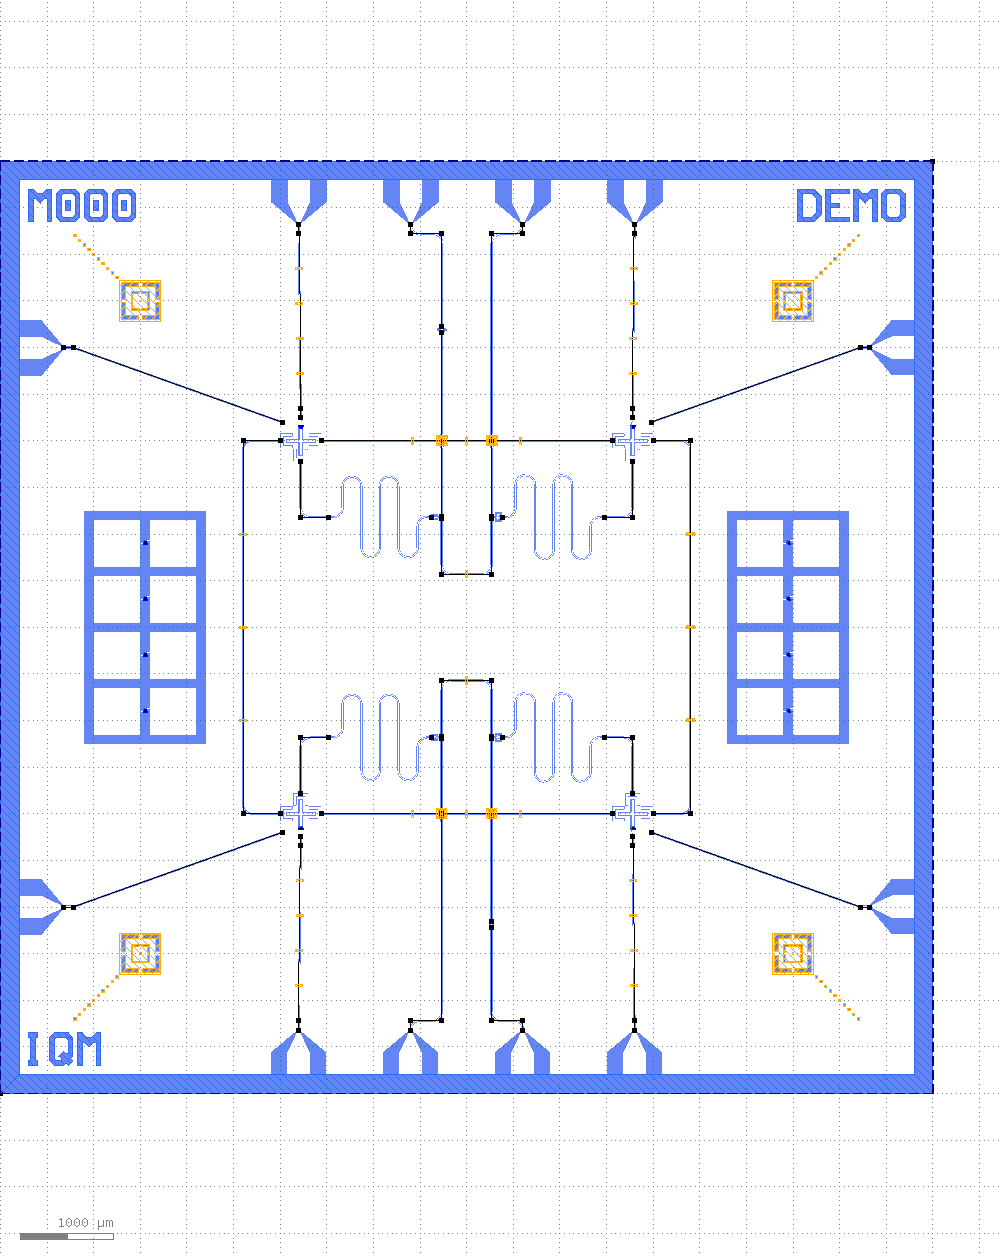 ../_images/kqcircuits.chips.demo.png